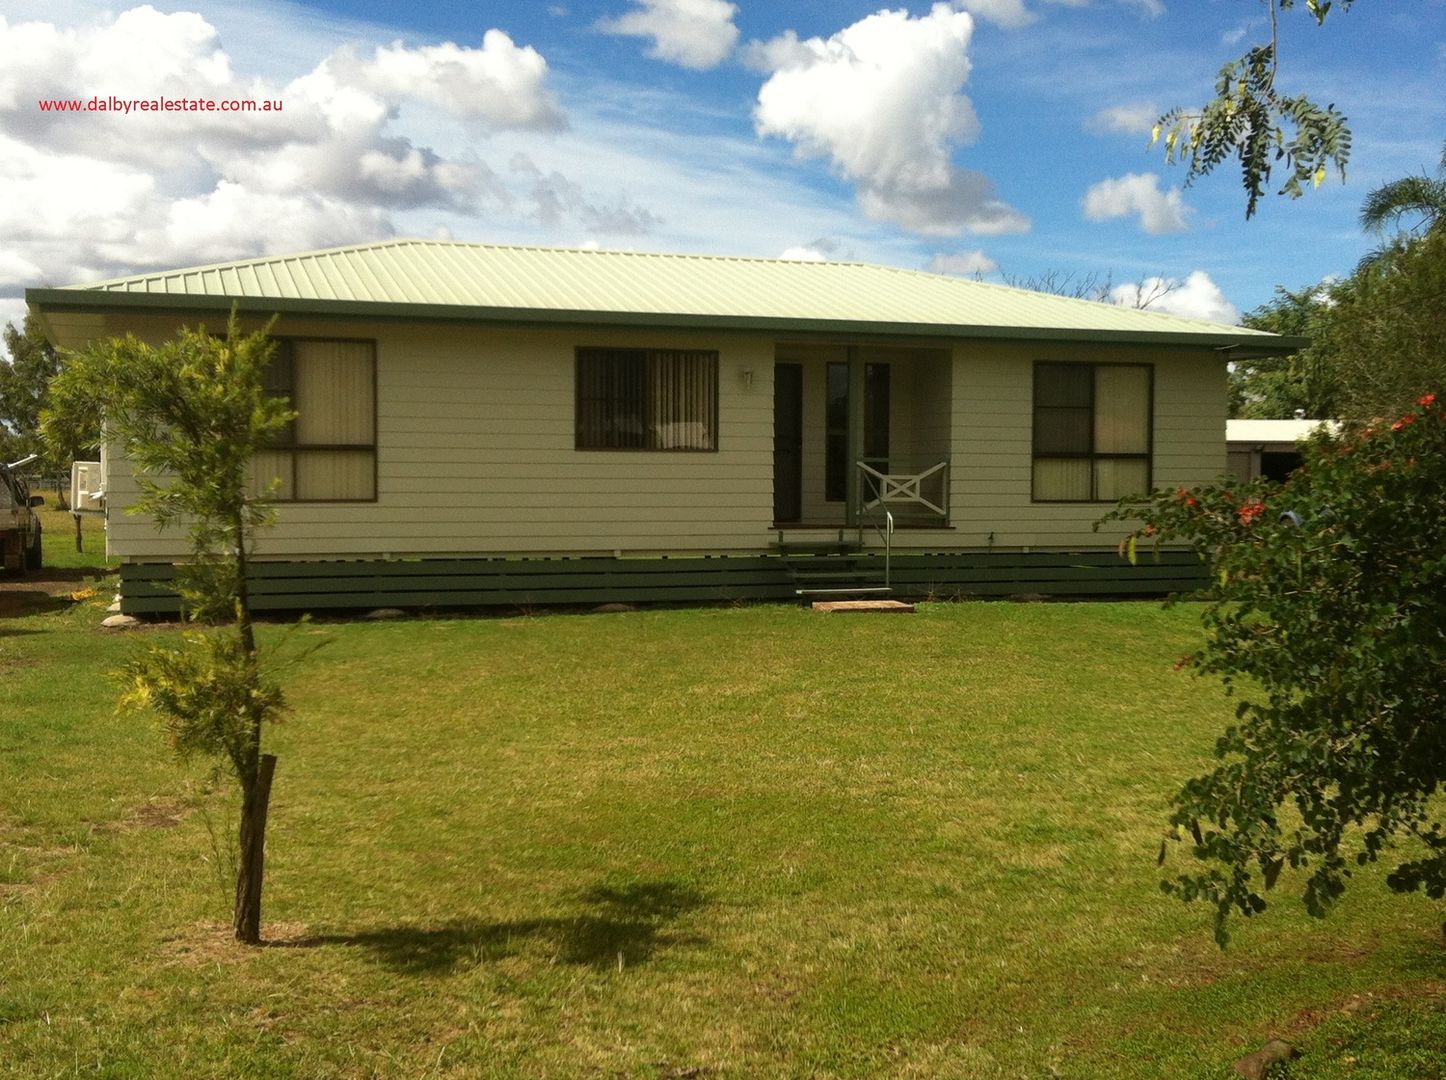 7 Raceview Drive, Dalby QLD 4405